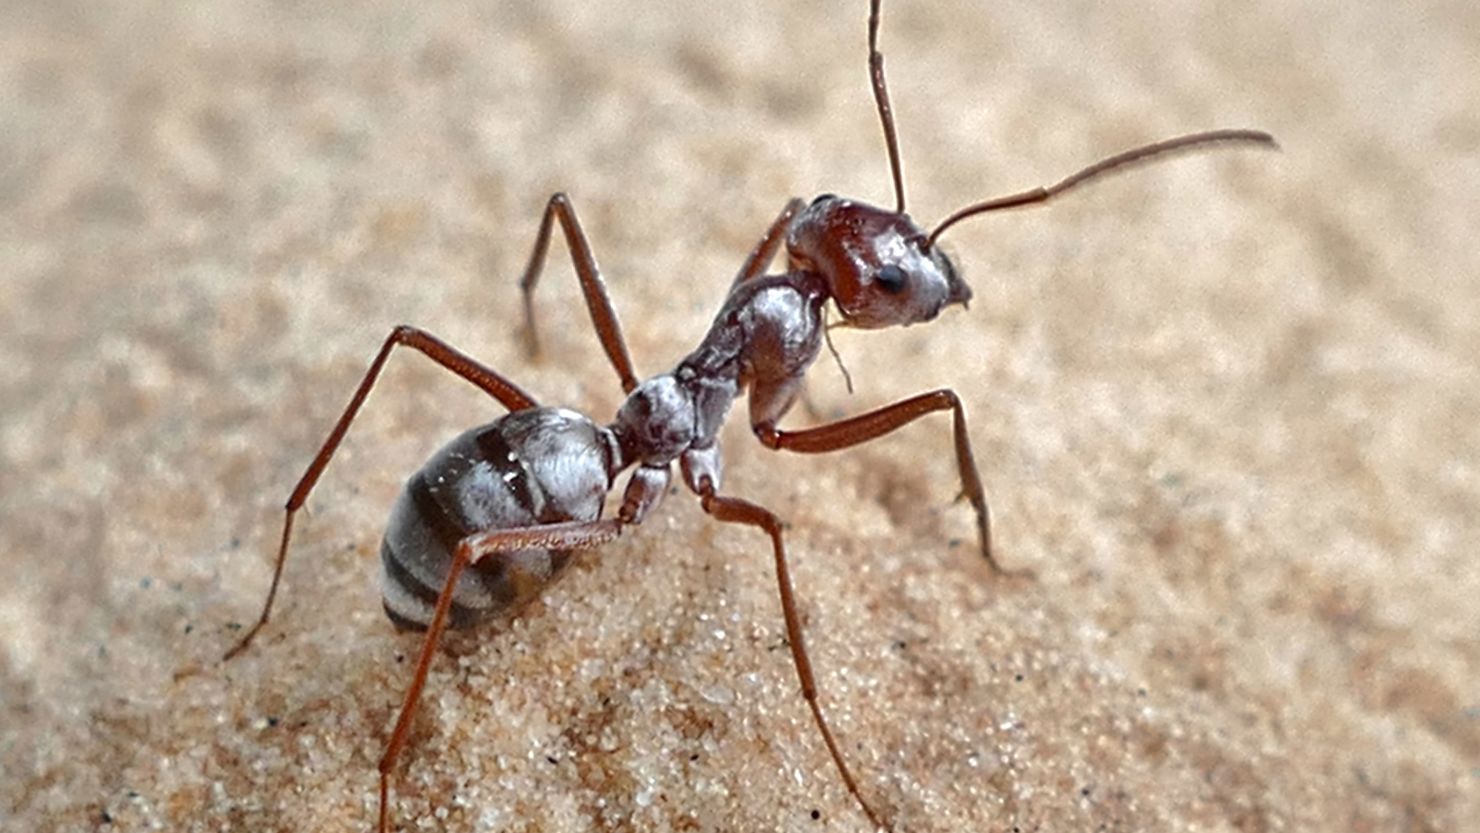 Ants Help Detect Gold in the Ground - Manhattan Gold & Silver